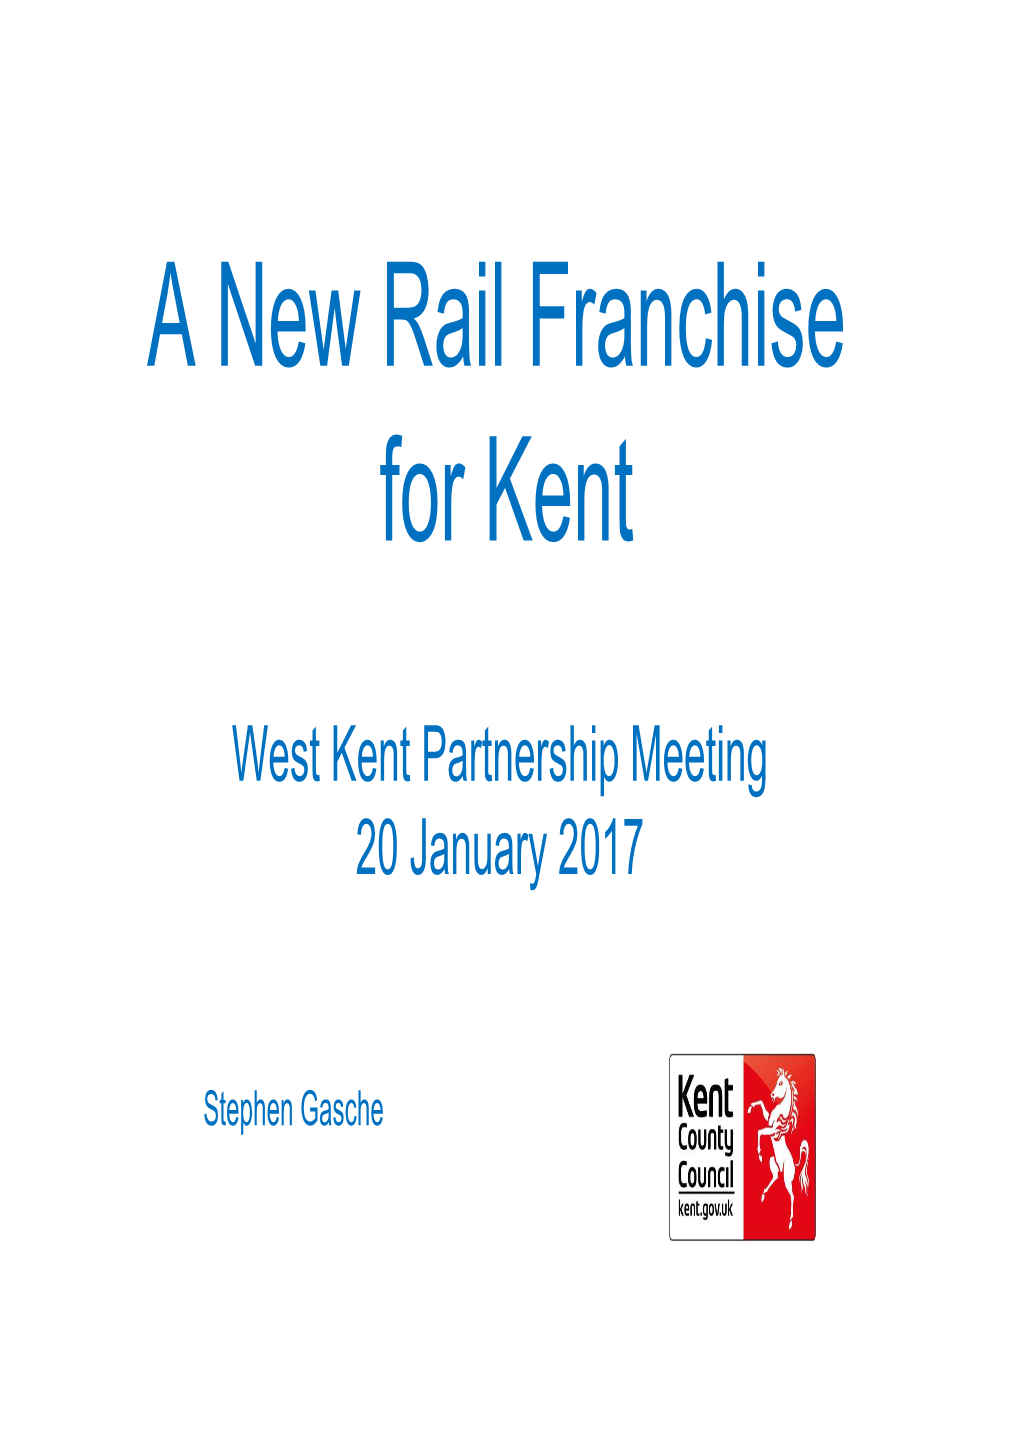 A New Rail Franchise for Kent